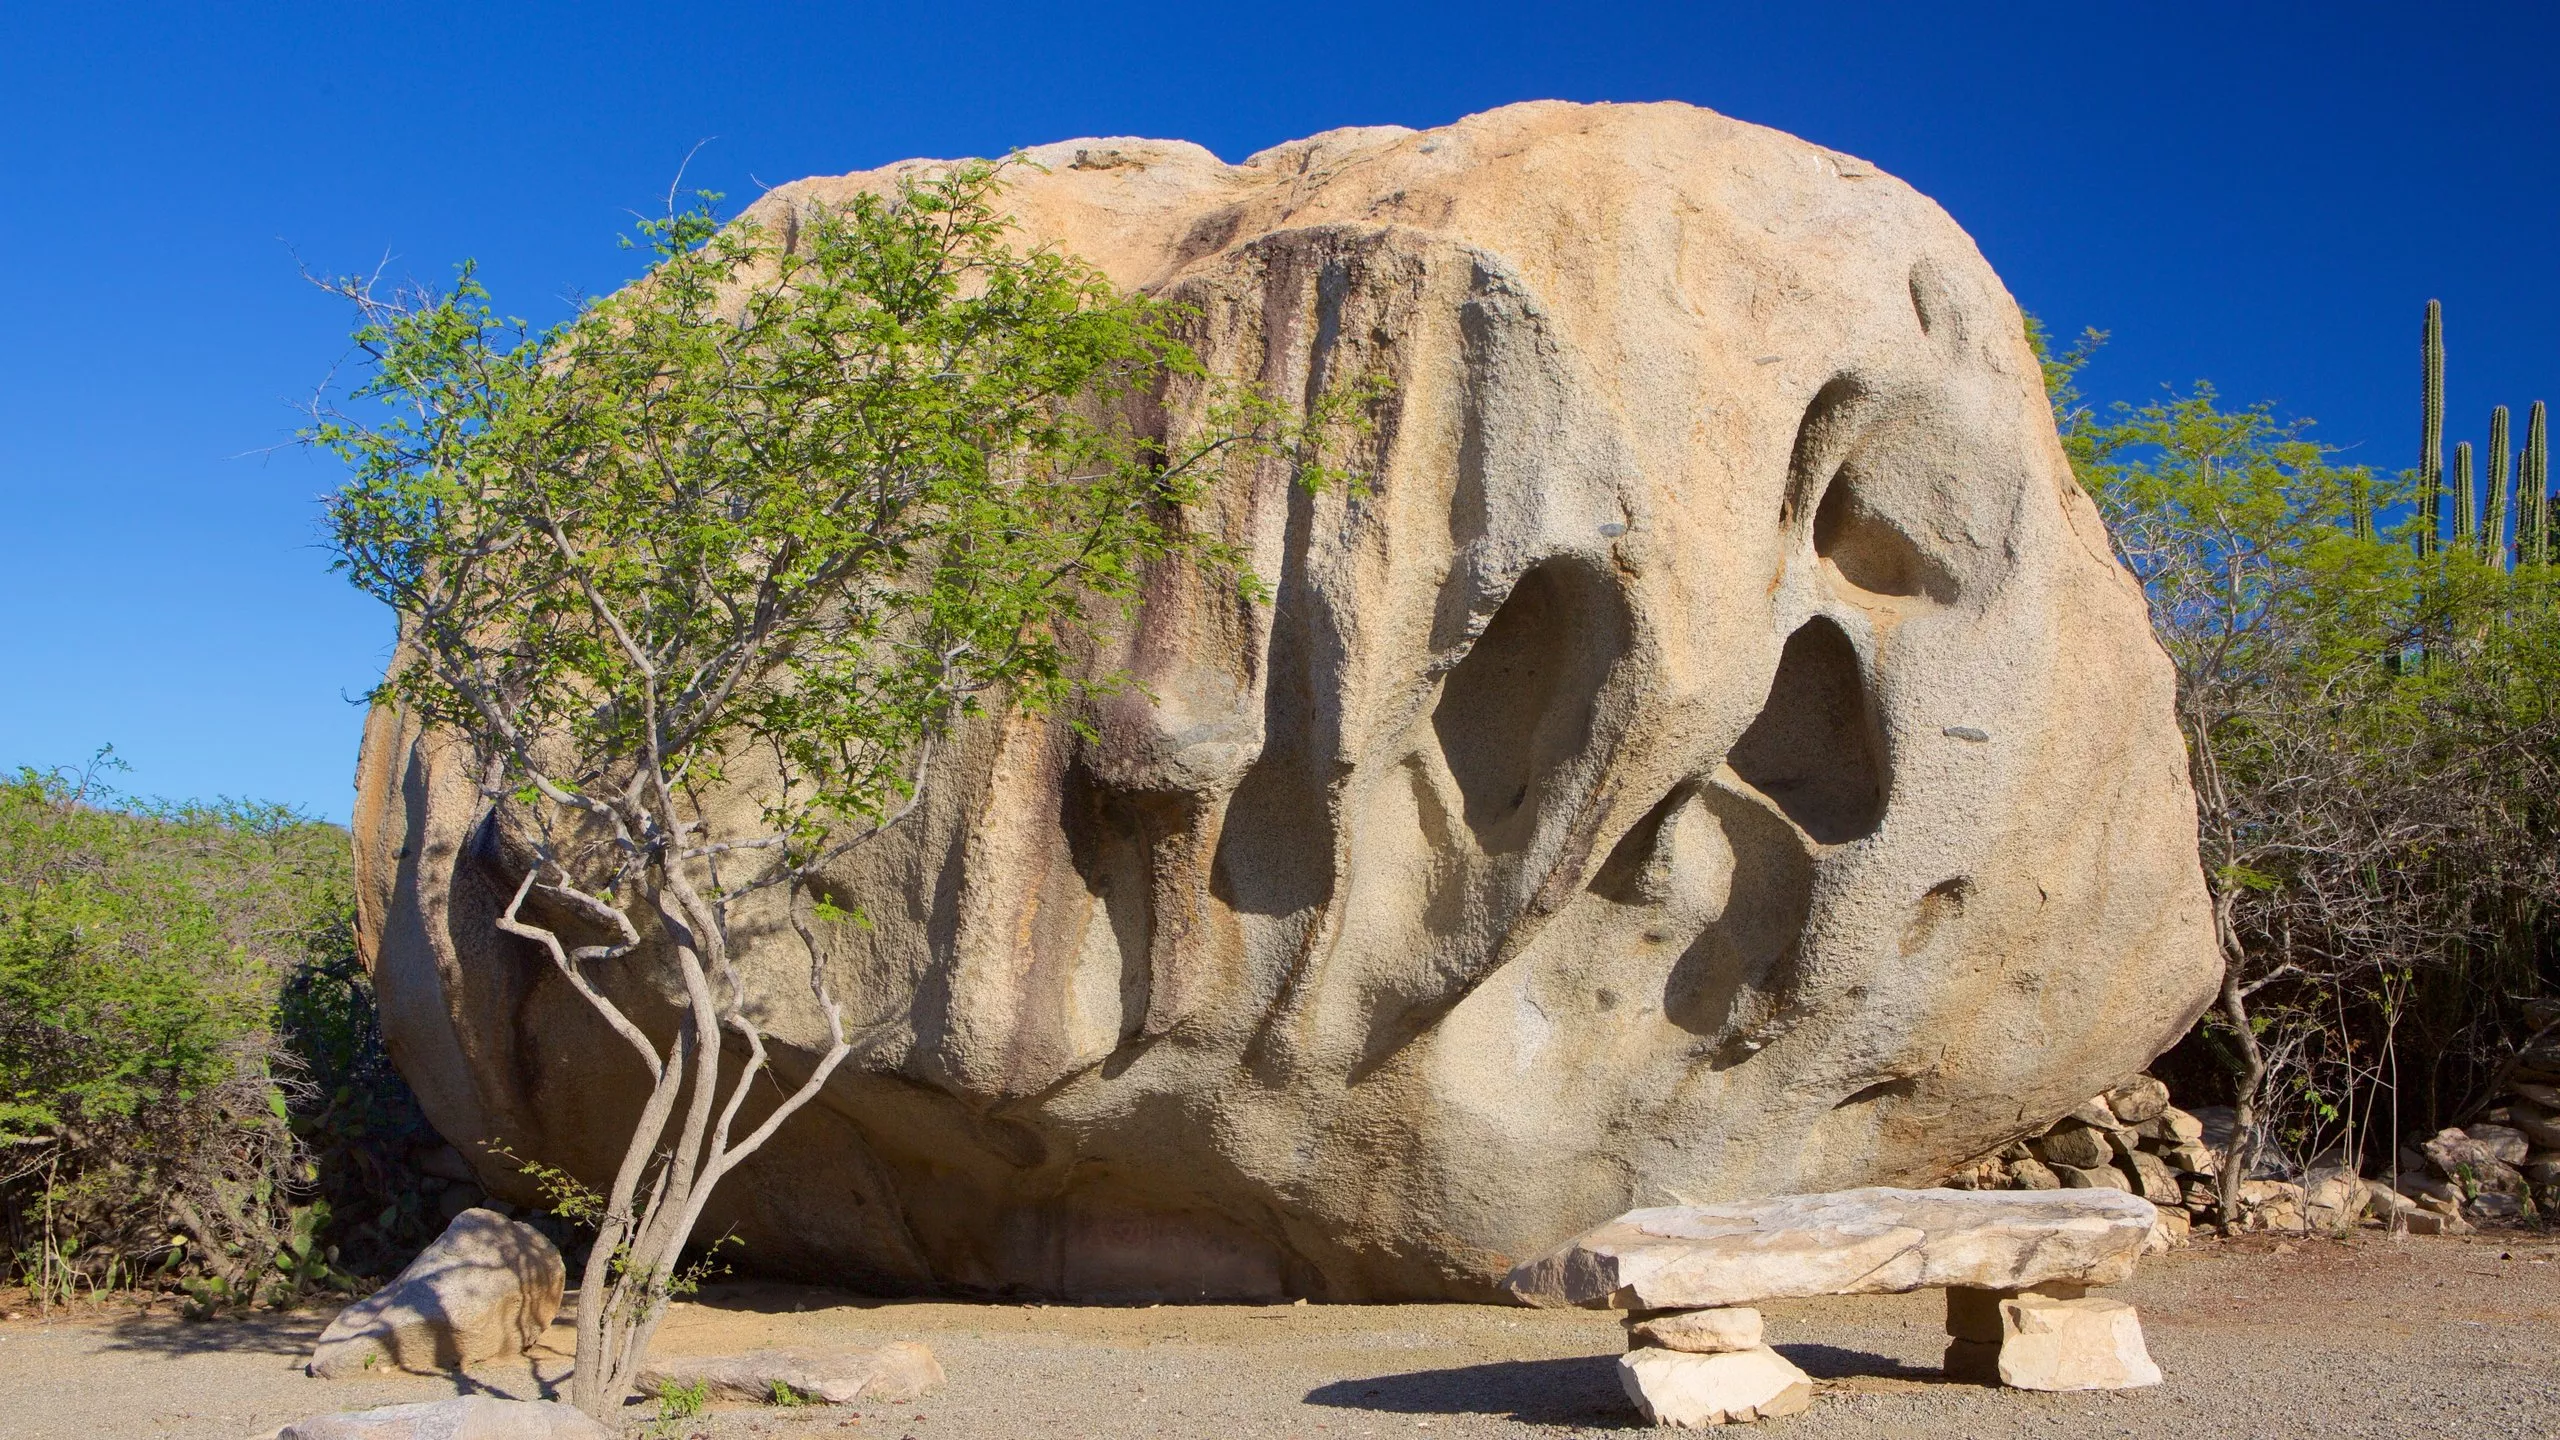 Ayo Rock Formations in Aruba, Caribbean | Nature Reserves - Rated 3.7